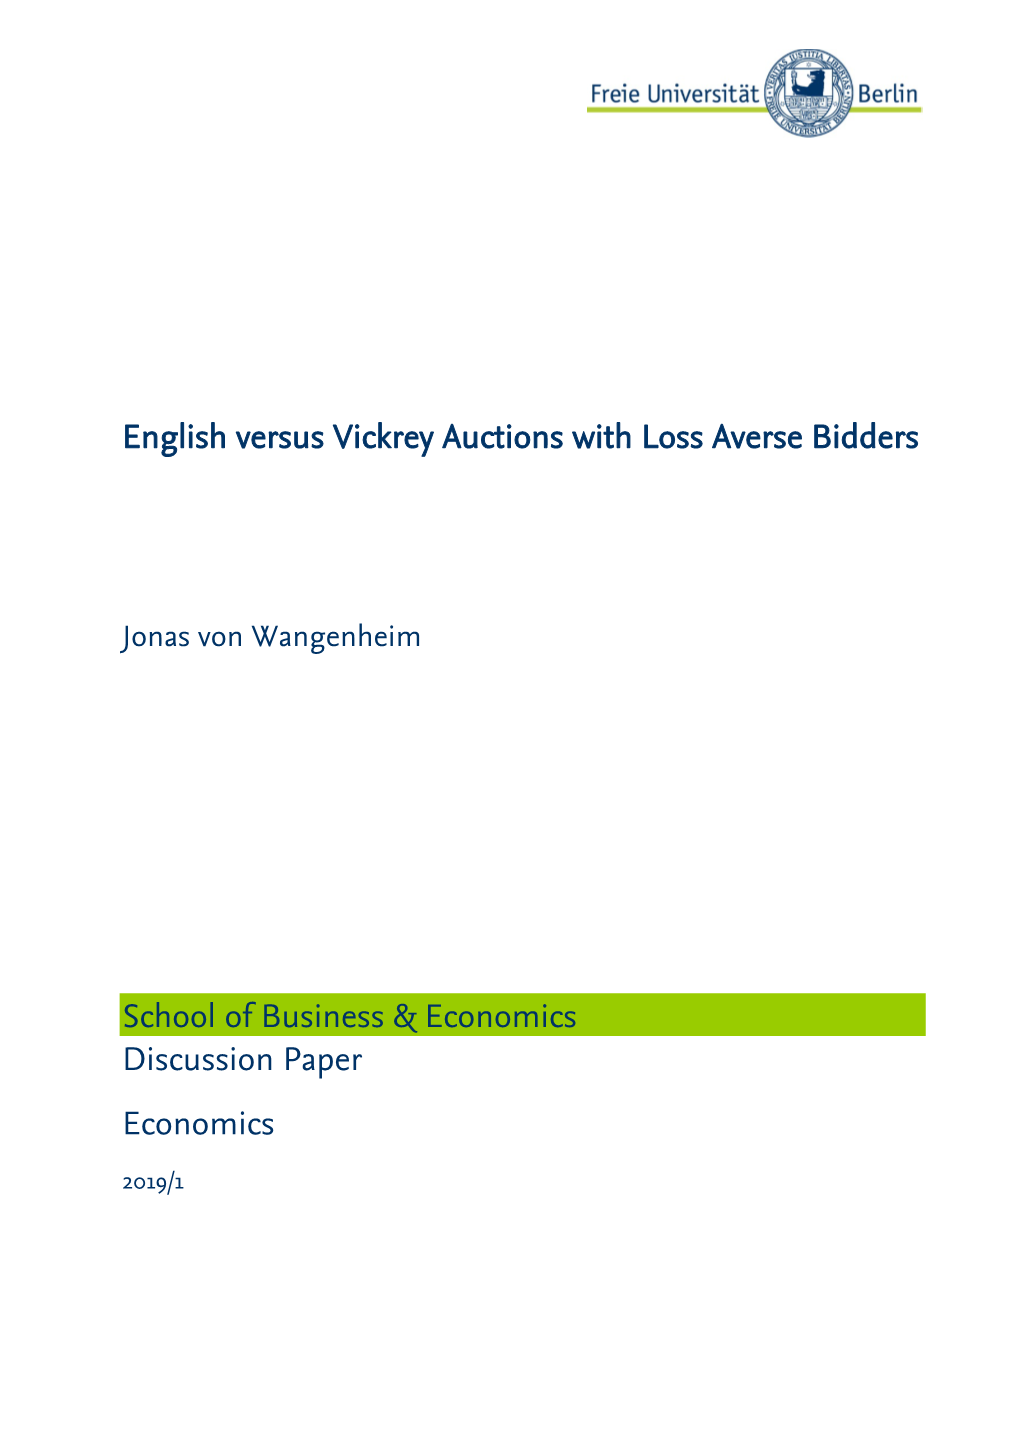 English Versus Vickrey Auctions with Loss Averse Bidders